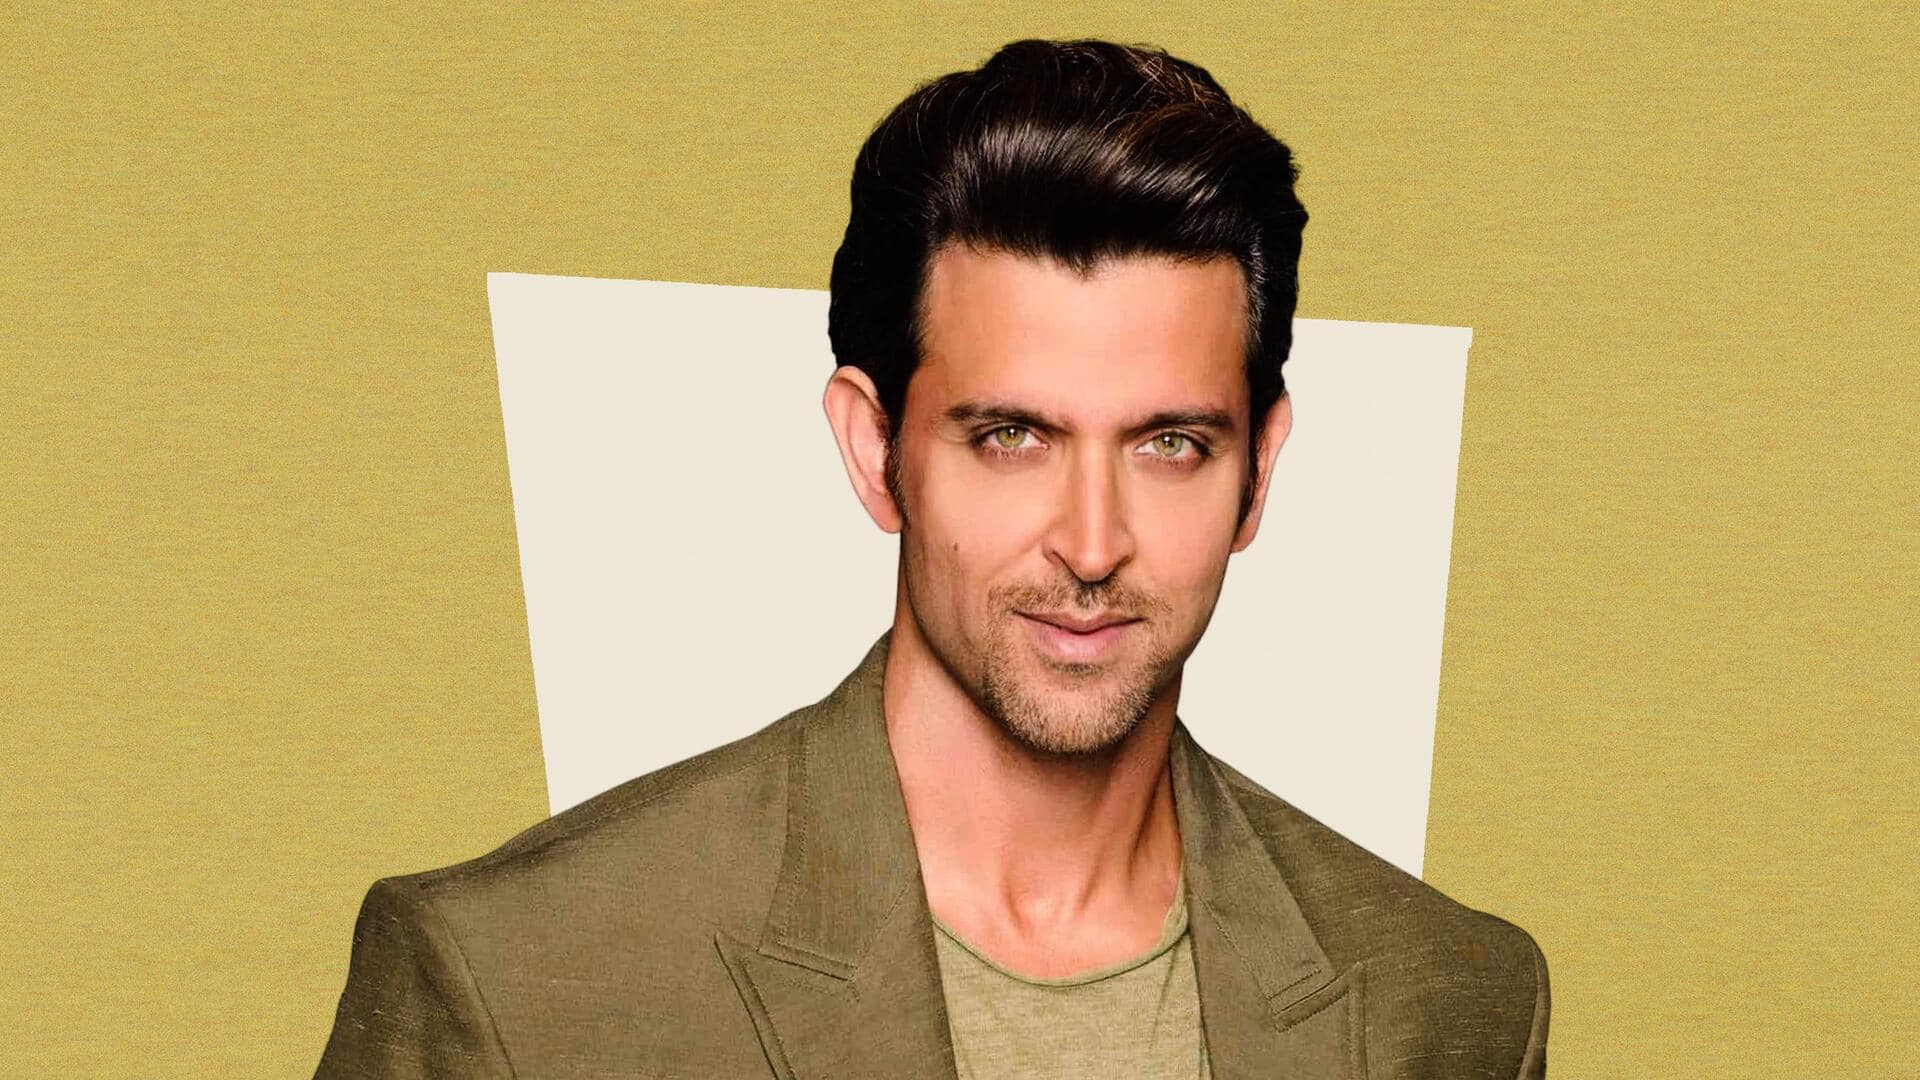 Hrithik Roshan's birthday: Films featuring him as an action hero